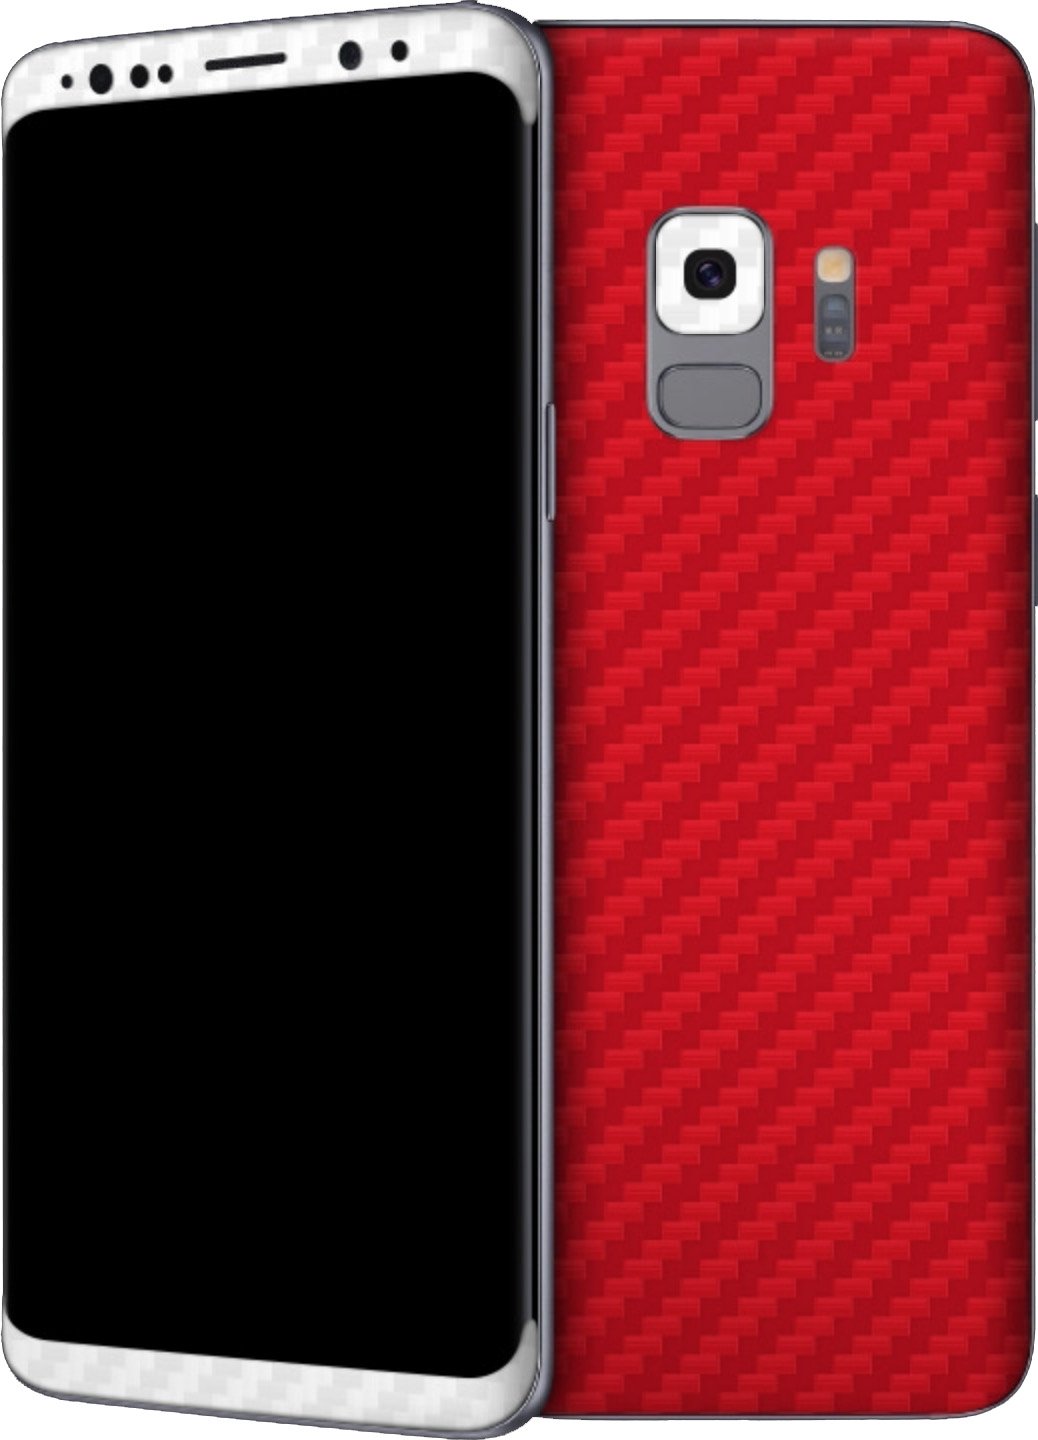 android central wallpaper gallery,mobile phone case,mobile phone,gadget,red,black